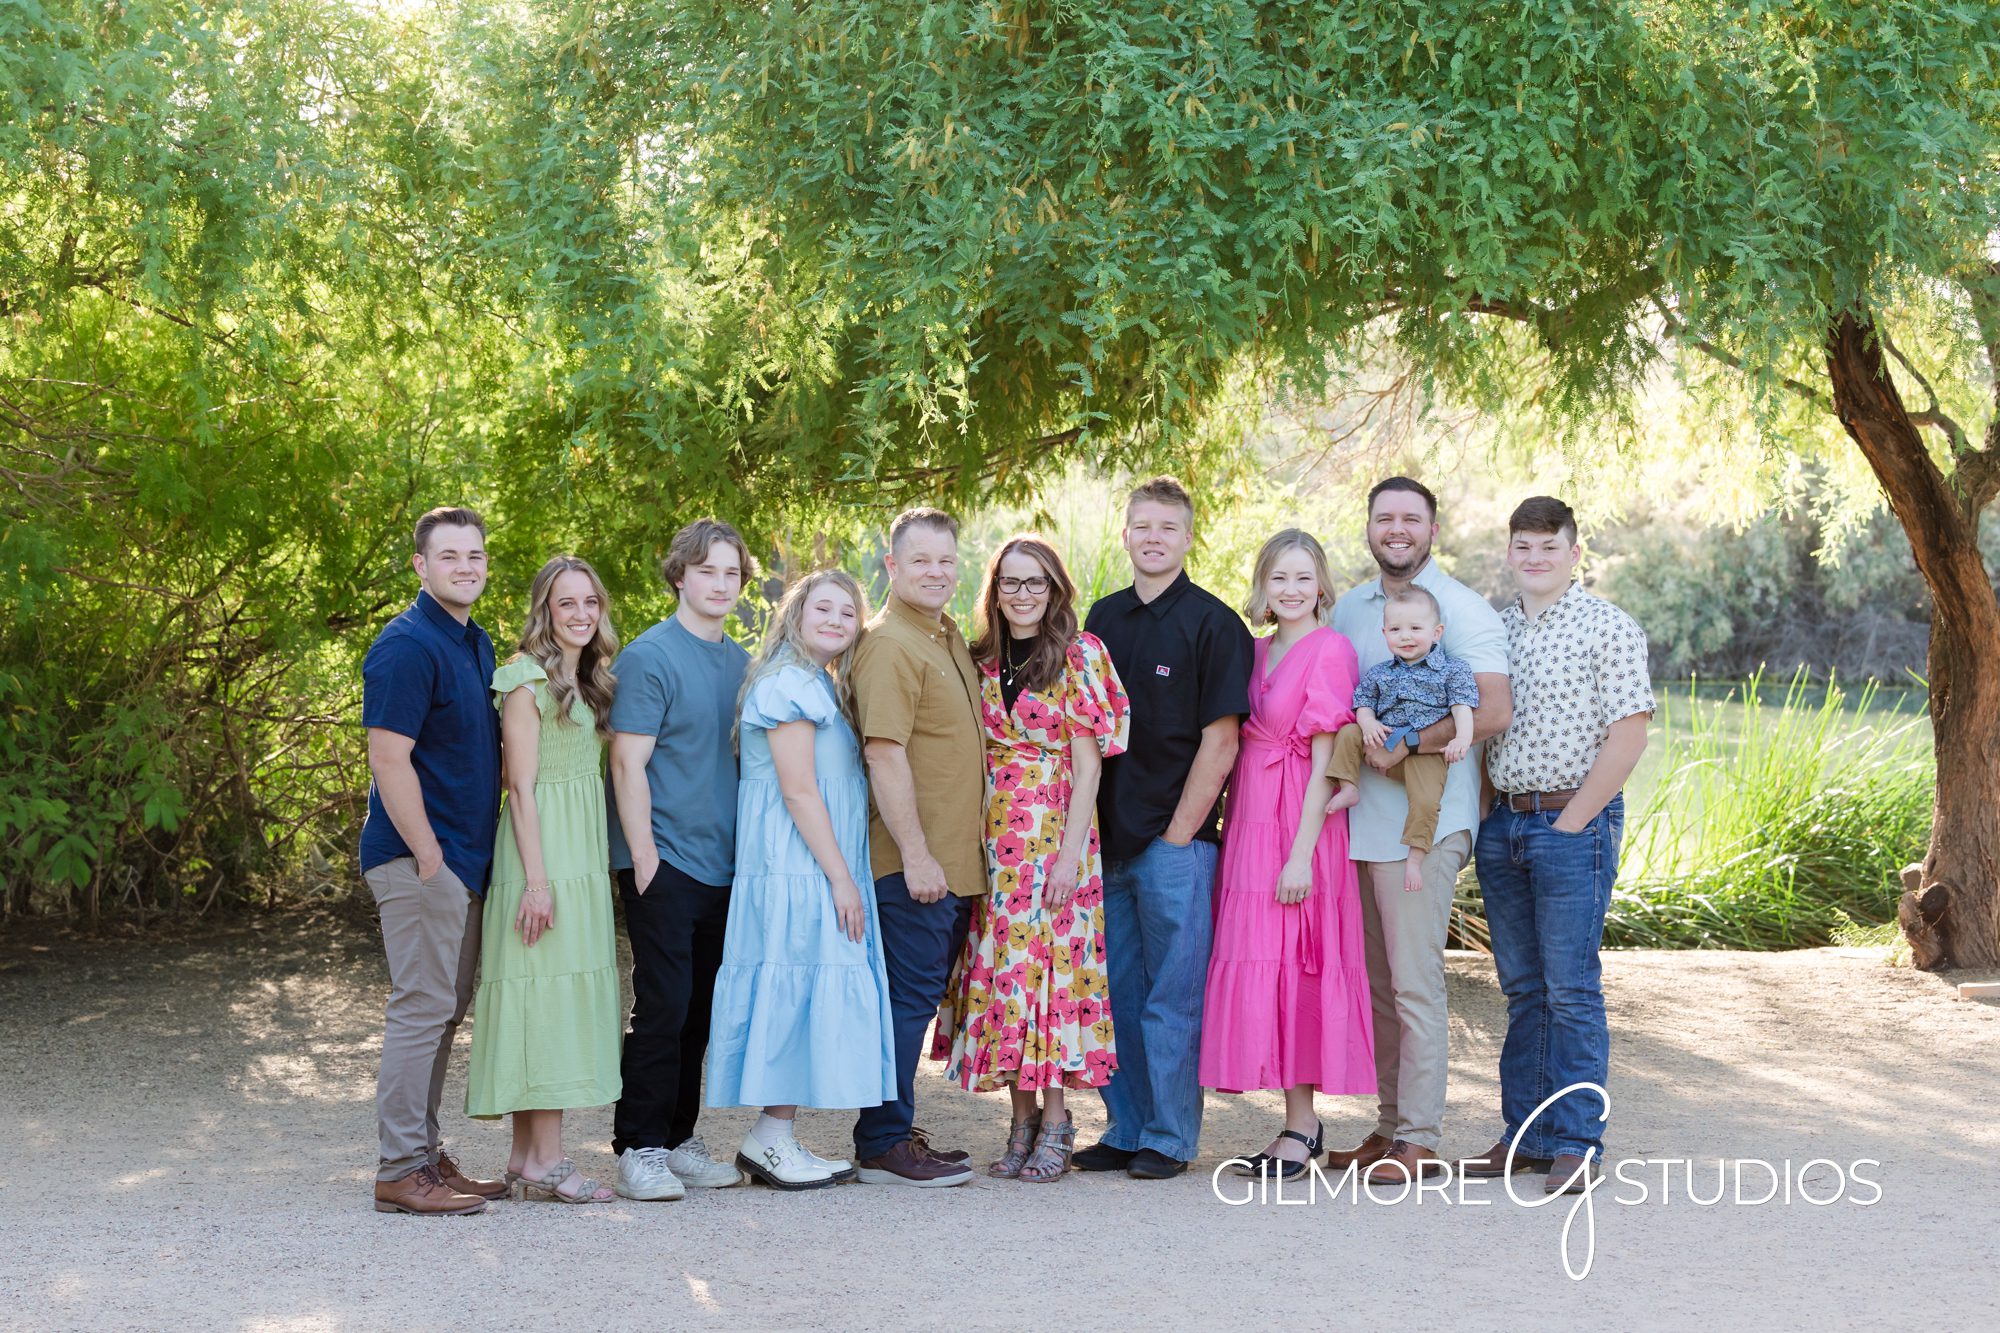 Family Reunion Photographer - Gilbert AZ - extended family, spring clothes, bright, riperian reserve, lakes, floral dress, lime green dress, khaki, spring colors, large family, reunion, family portrait with older siblings, teenagers, family photos with teens, queen creek, chandler, mesa, scottsdale, san tan, park, outdoor photo shoot locations in arizona, shaded photo locations, grandparents with grandbaby, updated headshot, gilmore studios, sisters, brothers, pose, posed, family posing, family portraits, family photography outfit ideas, 